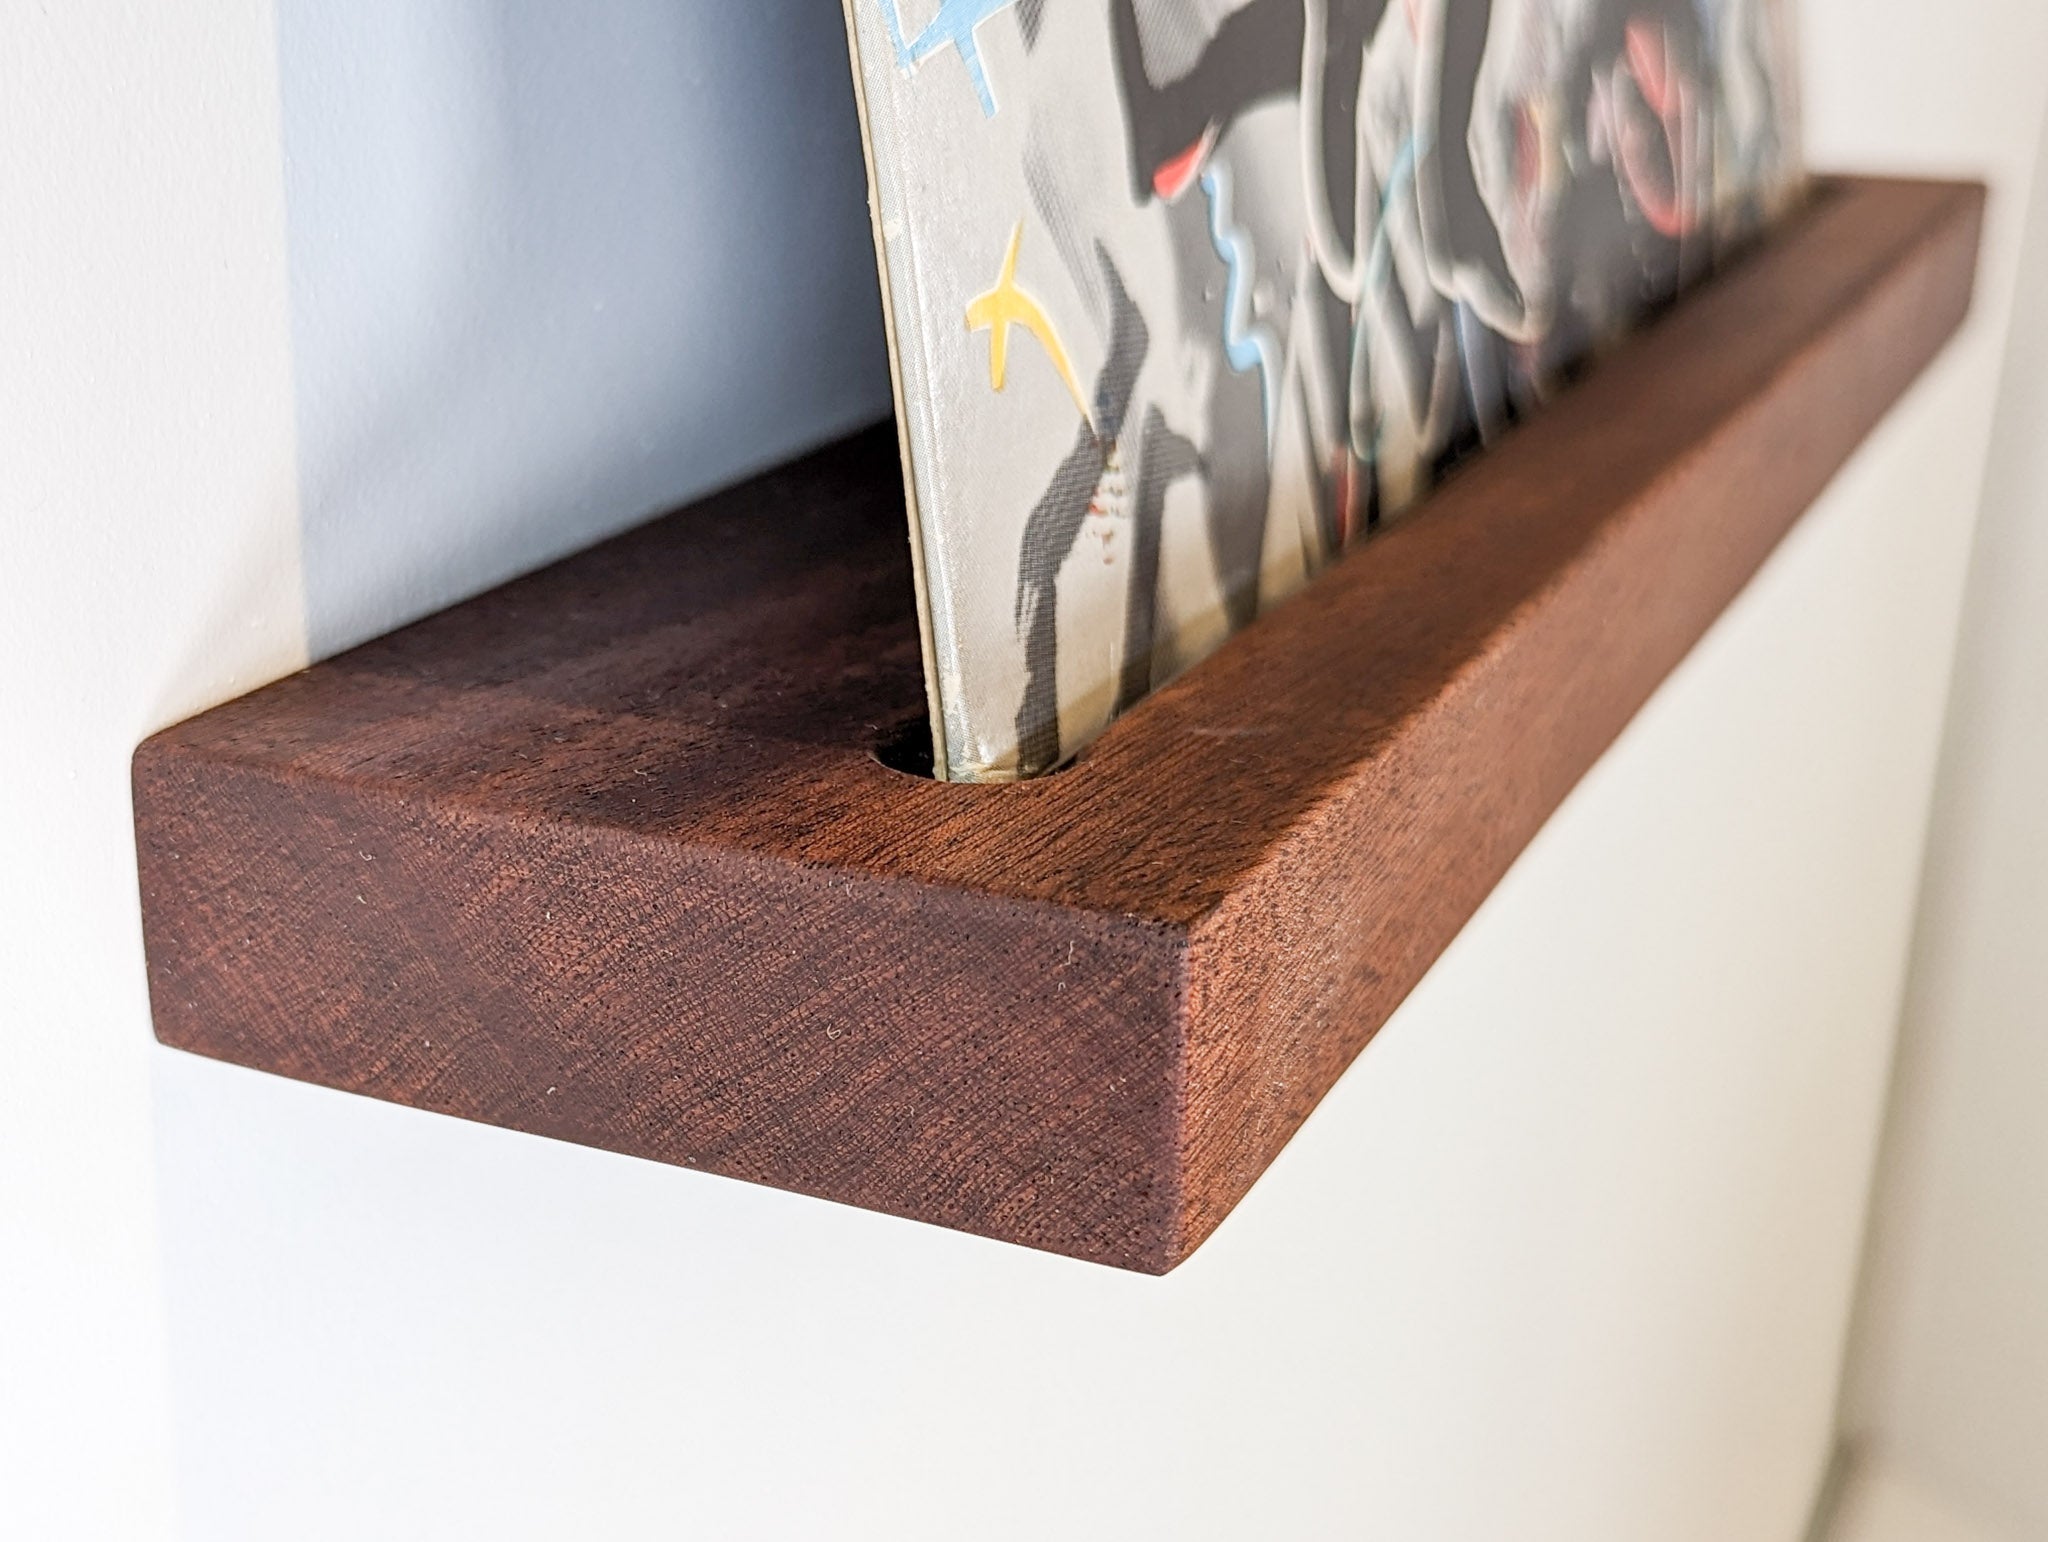 Long floating shelves in mahogany – NookWoodworking